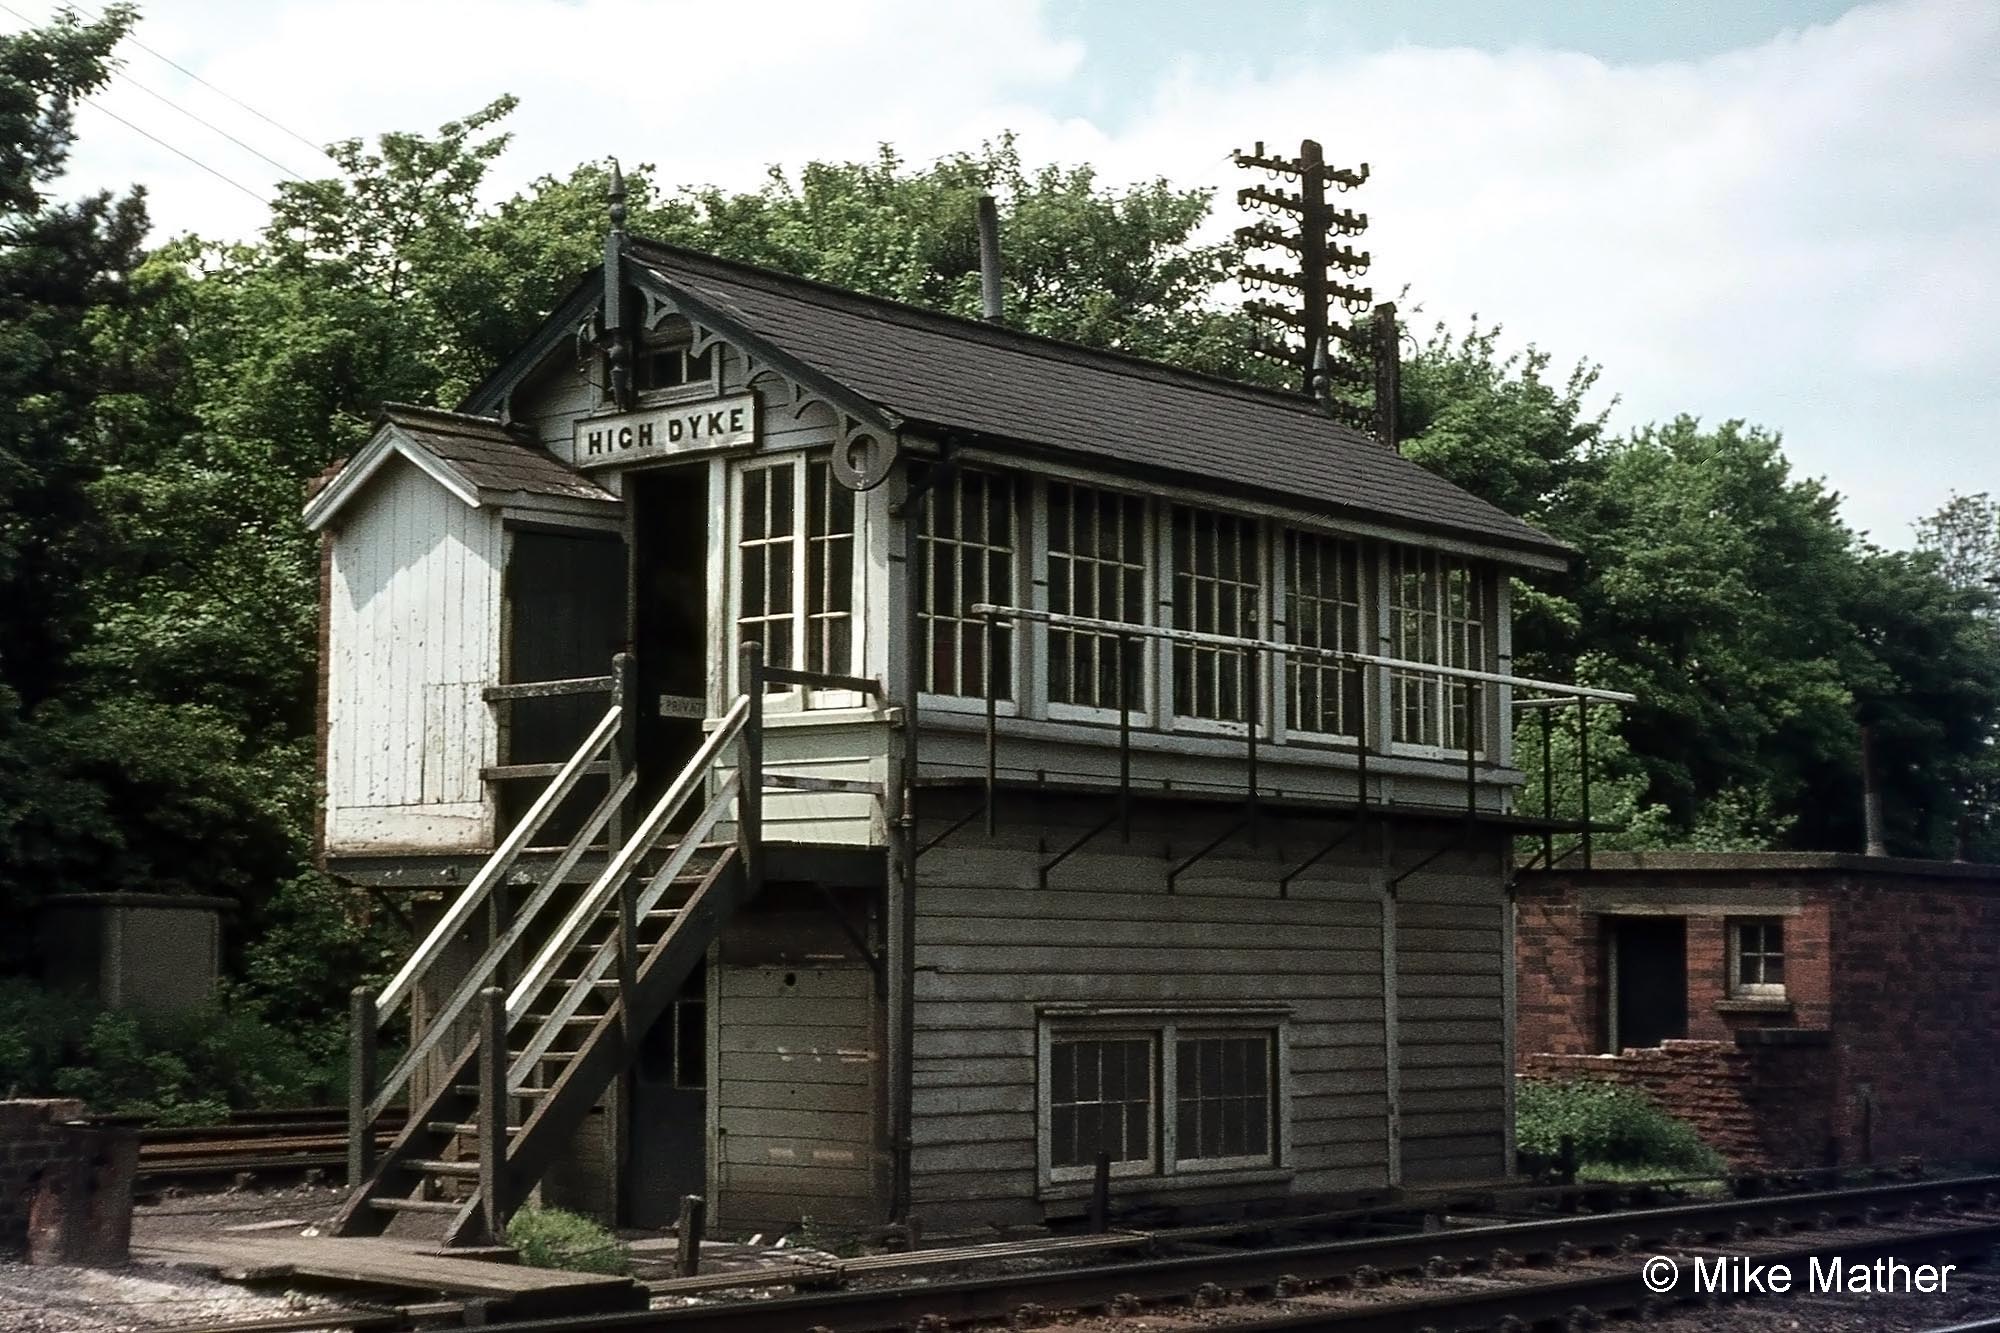 High Dyke signal box in June 1974. Photograph by Mike Mather.